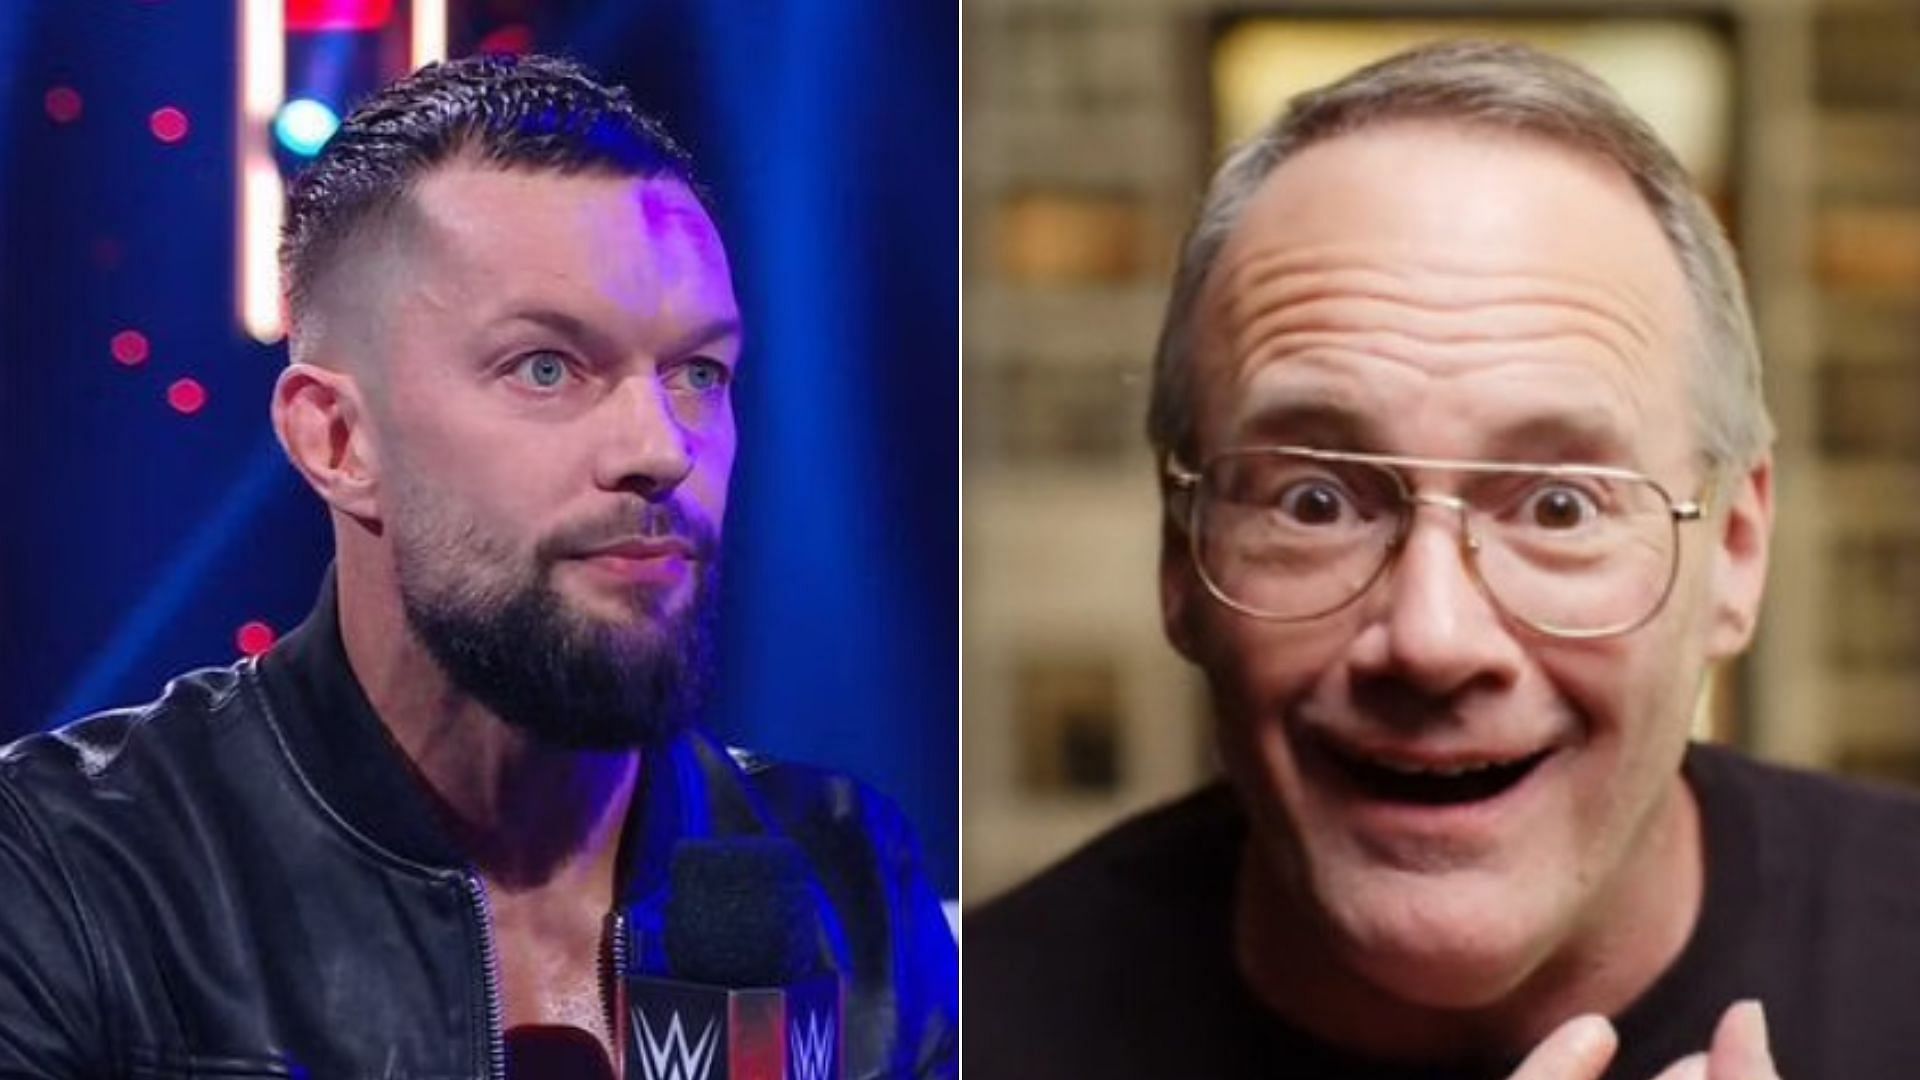 Finn Balor joined the Judgment Day faction earlier this week